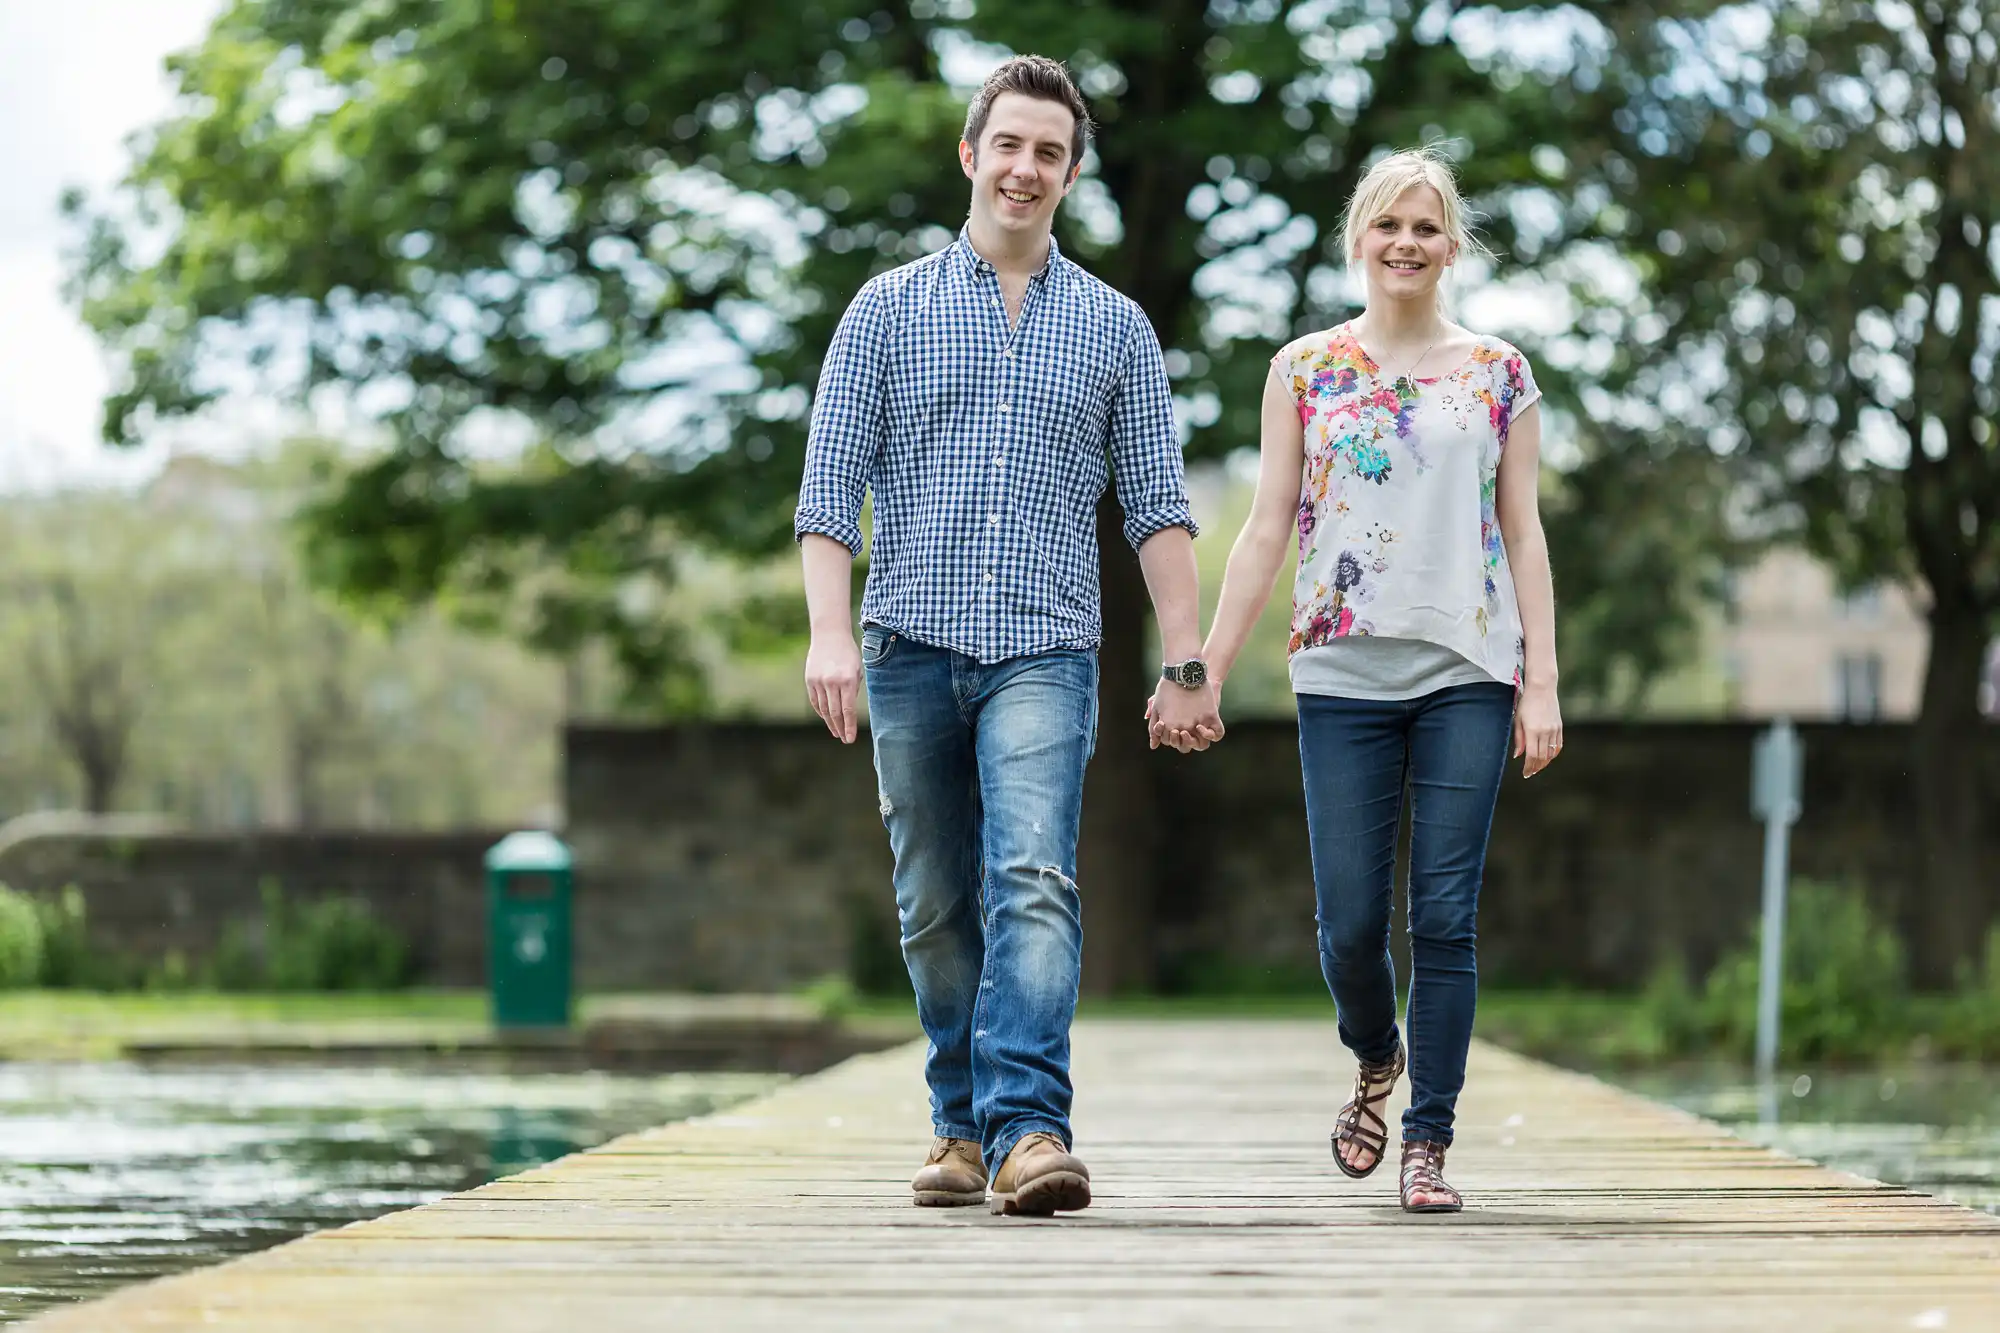 A young couple holding hands and smiling while walking on a wooden dock in a park, surrounded by trees and a pond.